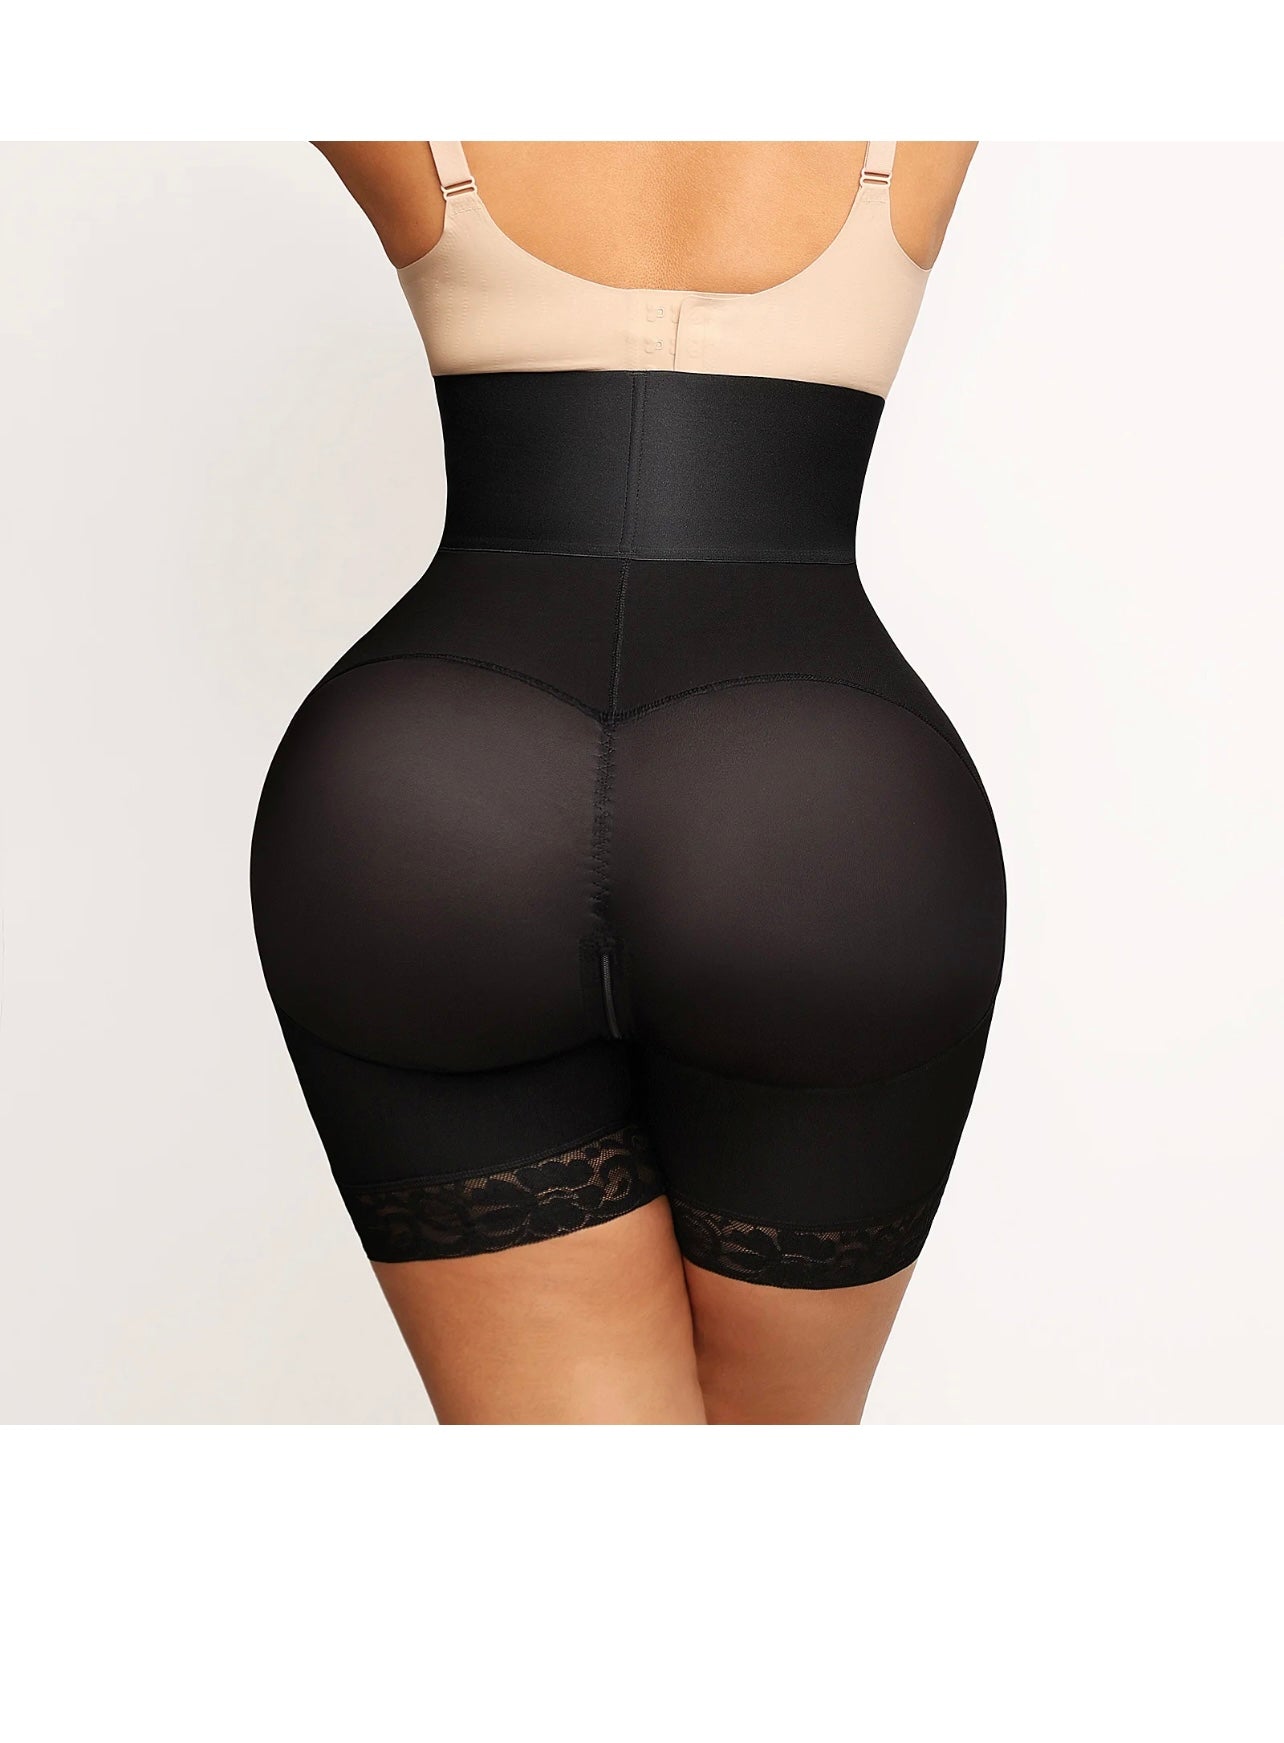 Assorted Shapewear To Help You Look Snatched In Your Party Wear